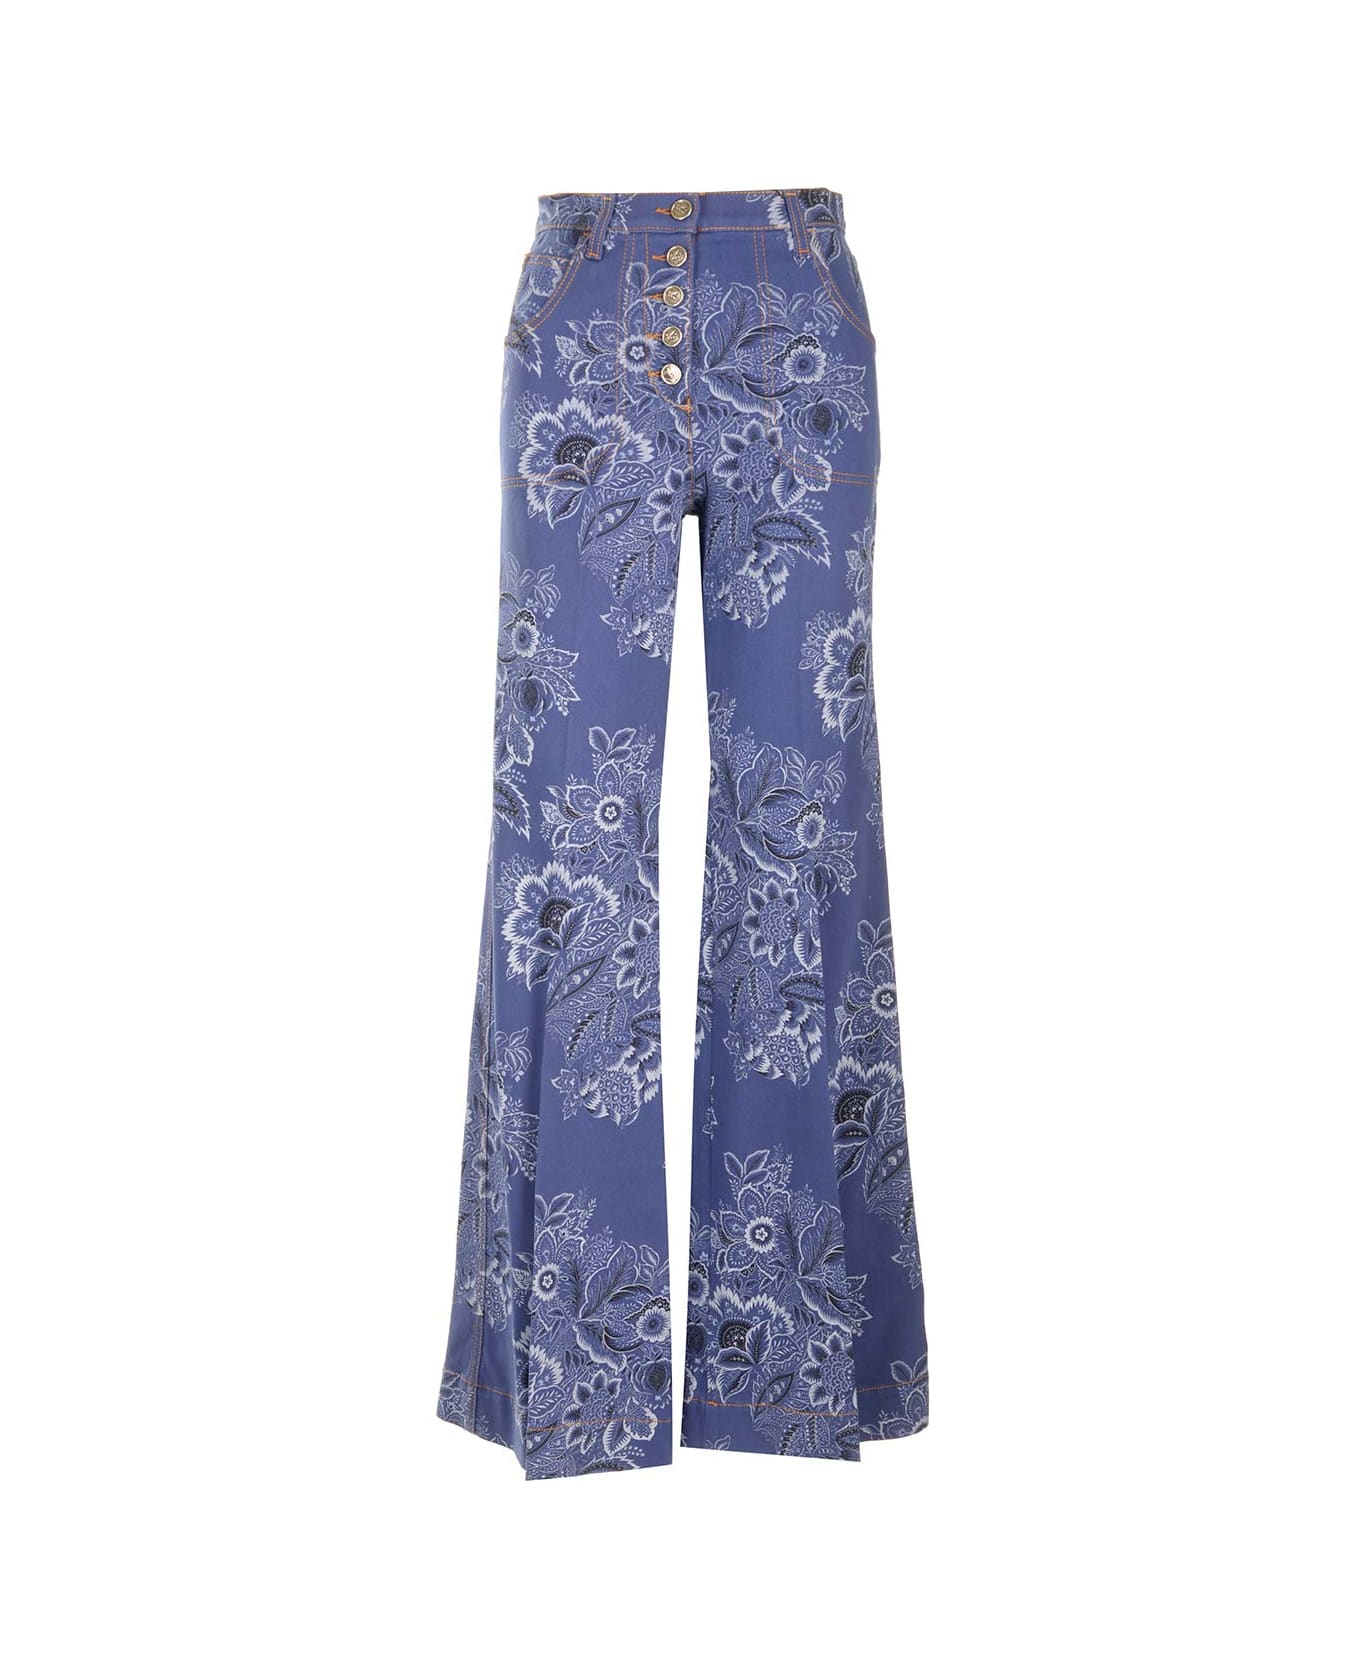 Etro Printed Flare Jeans - Blu ボトムス